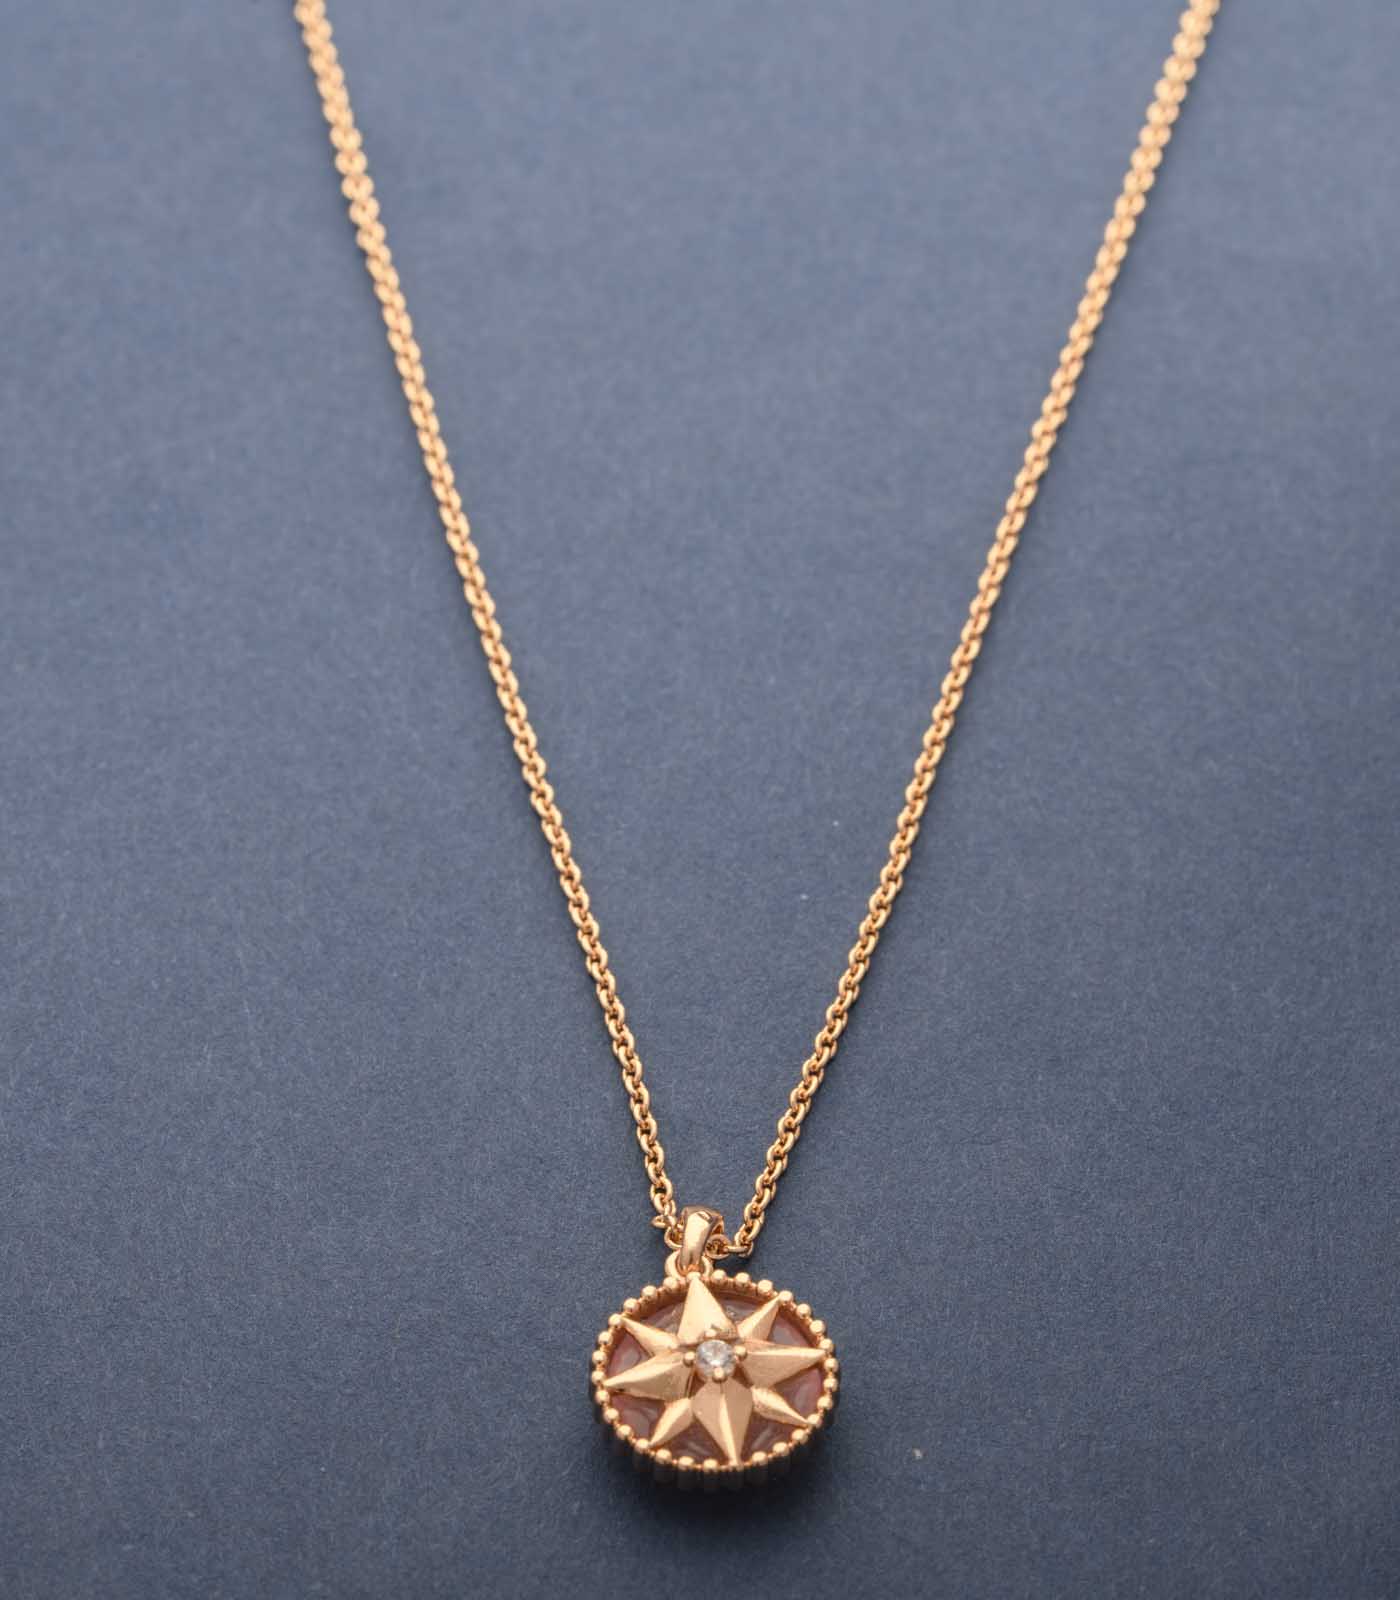 Hand Crafted Beautiful Brass Compass Necklace (Brass)